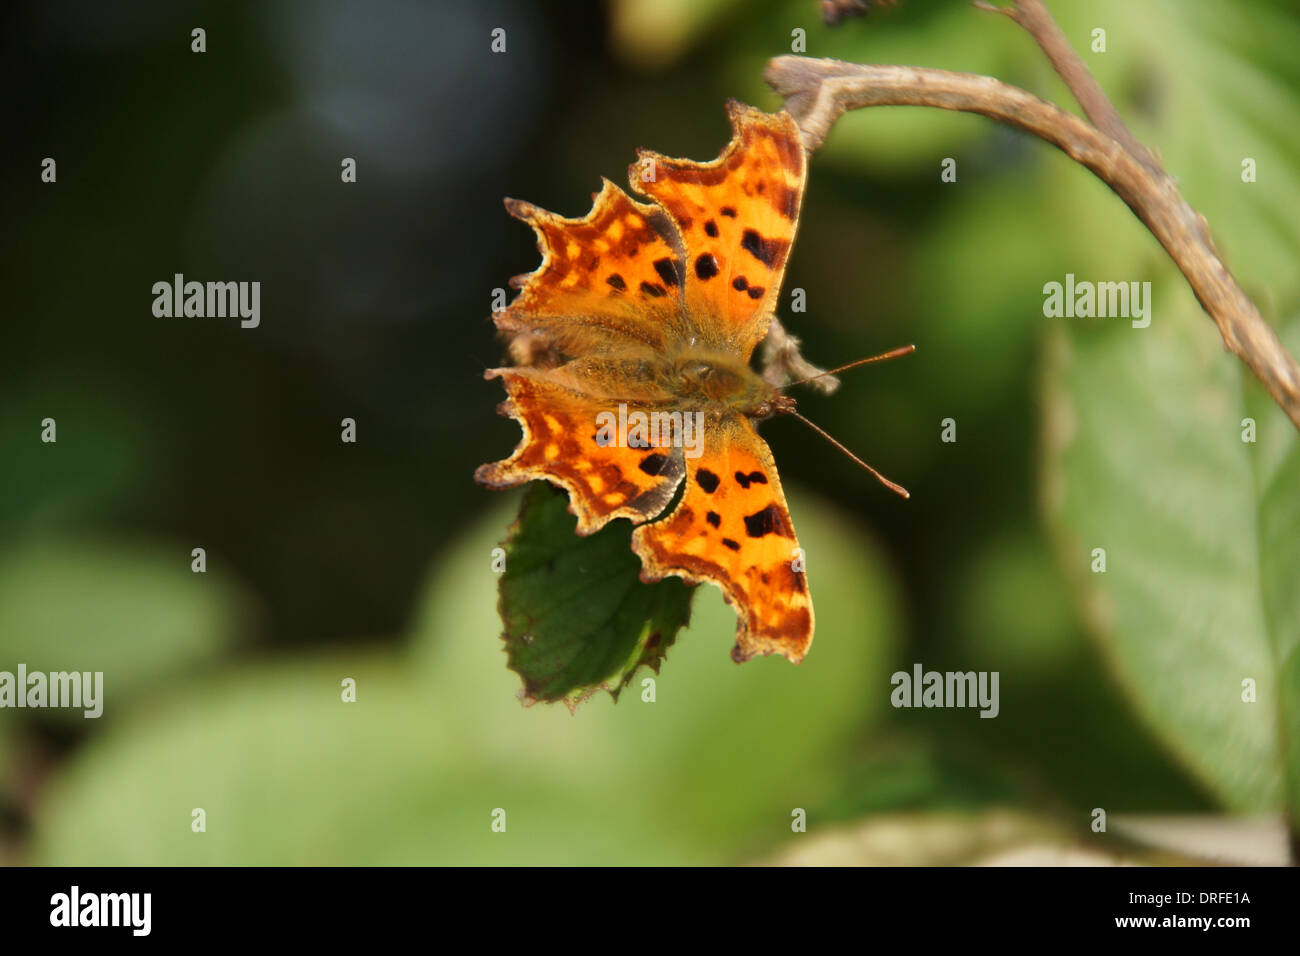 A Comma butterfly on a leaf taken during a walk in late summer 2013 Stock Photo